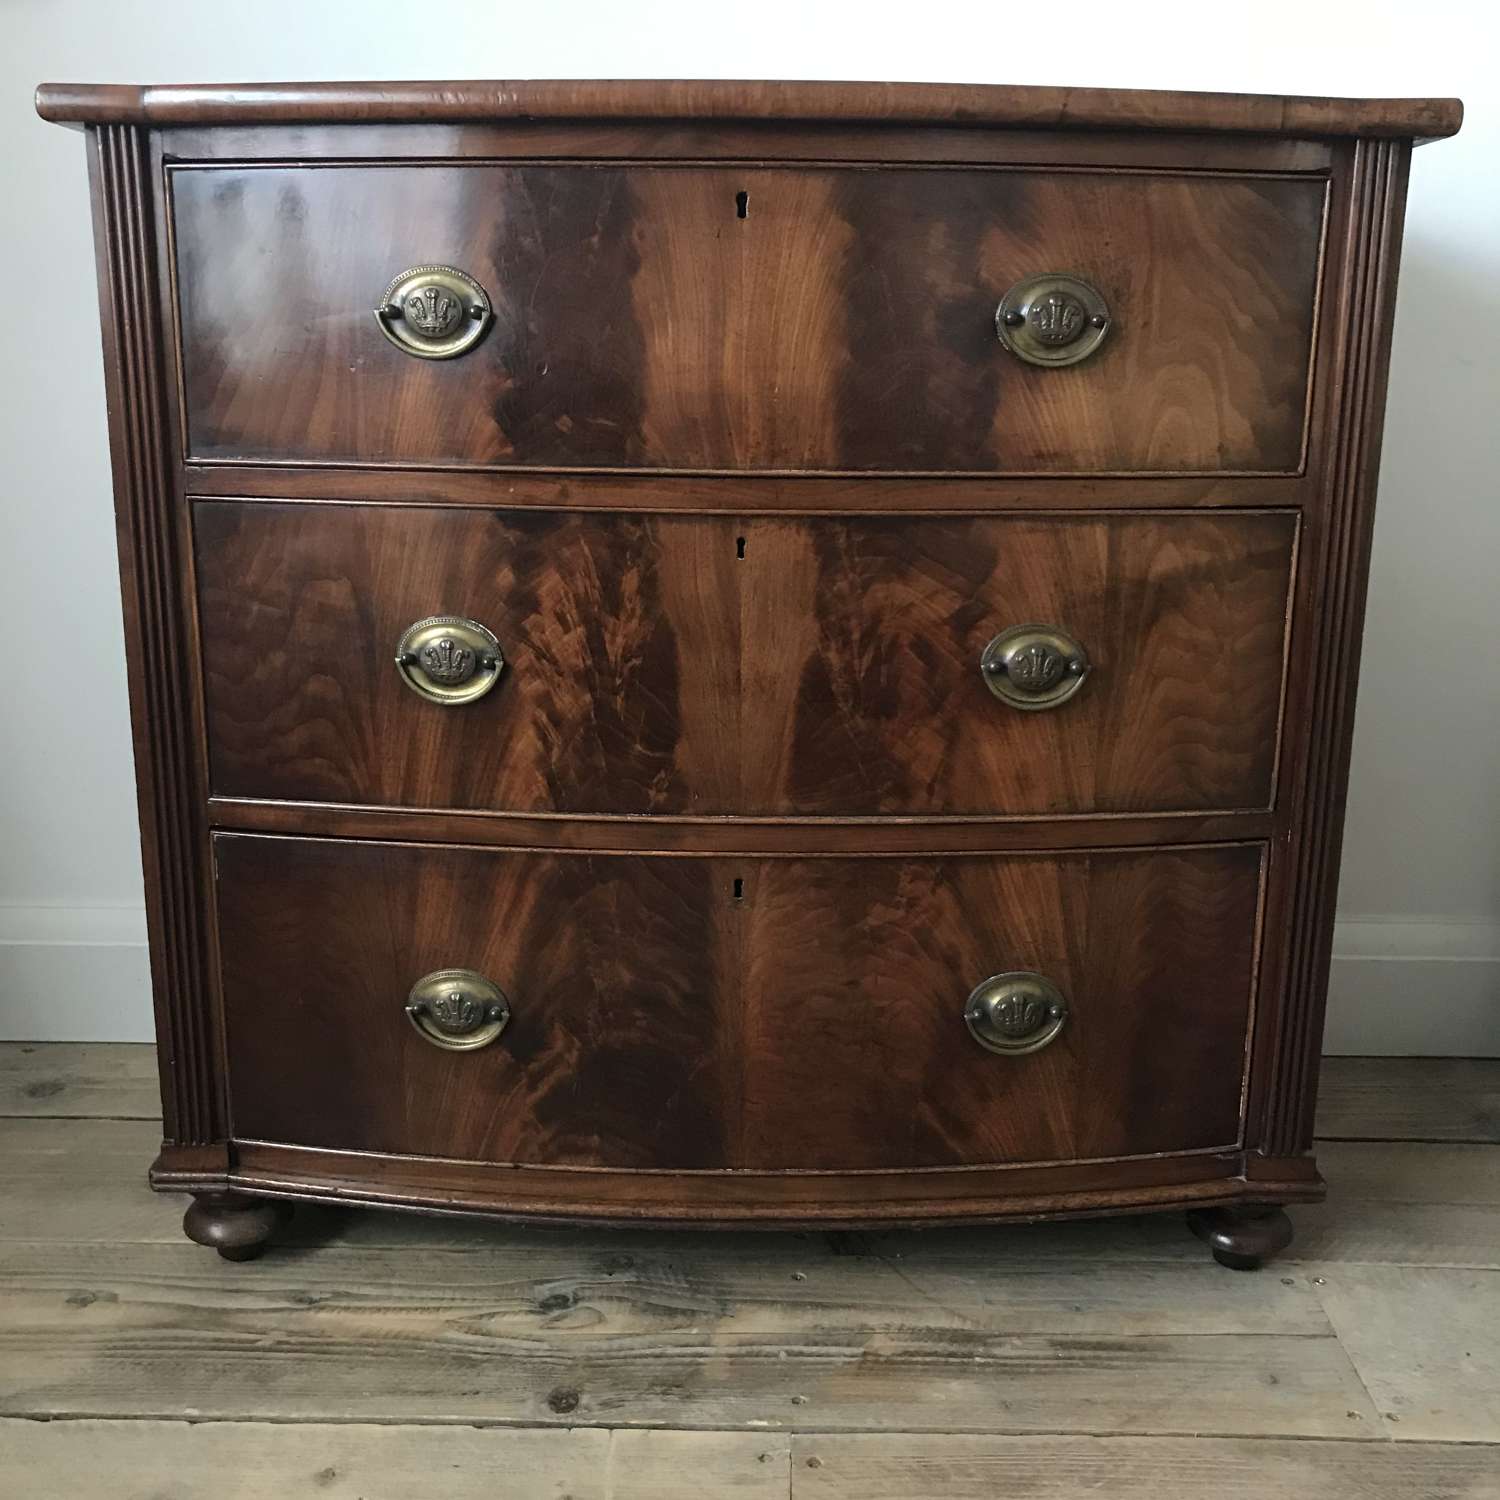 Early 19th century bow front flame mahogany chest of drawers